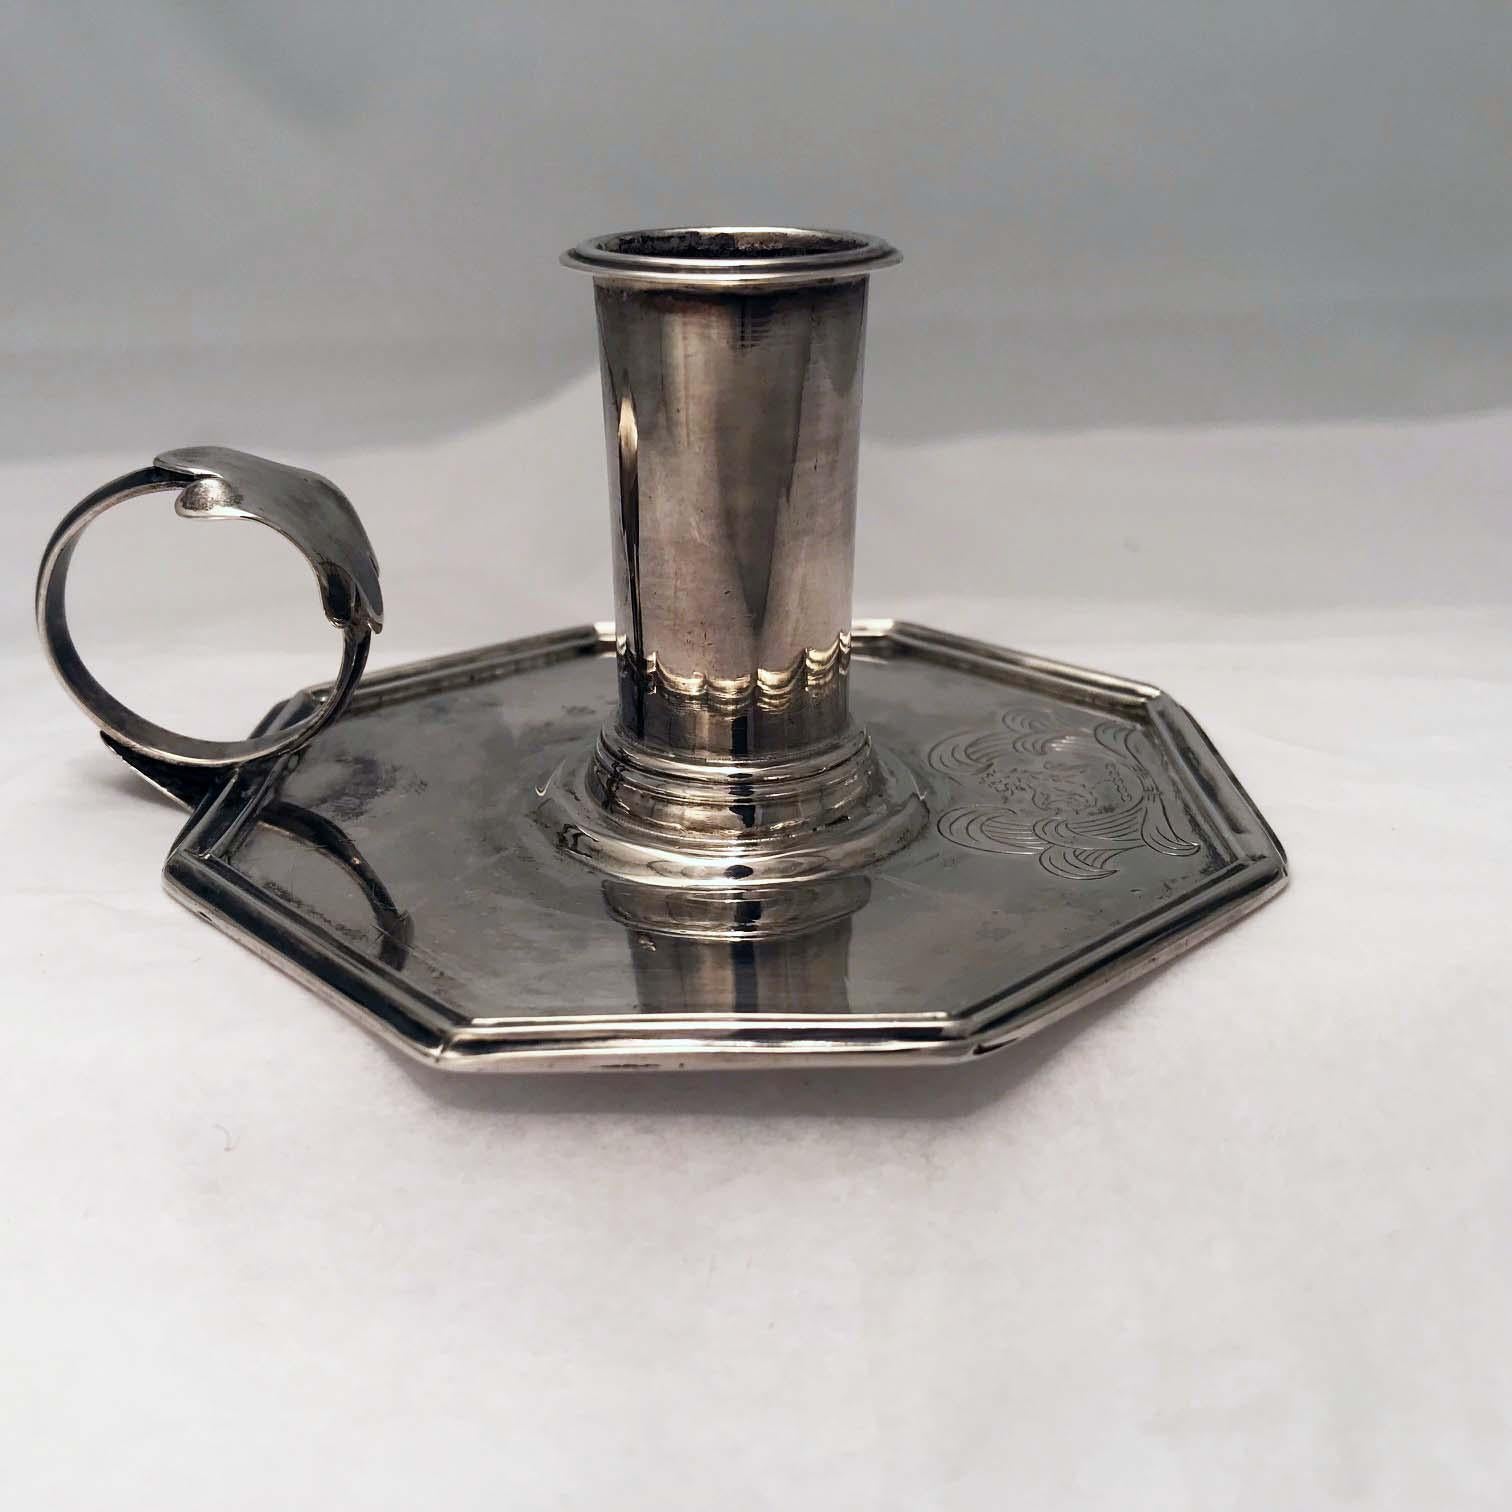 This small silver chamberstick, though of uncertain origin, is very much in the style of the early part of the eighteenth century. It has a pleasingly simple form, The reeded octagonal base is centered by the candlestick proper and has an applied